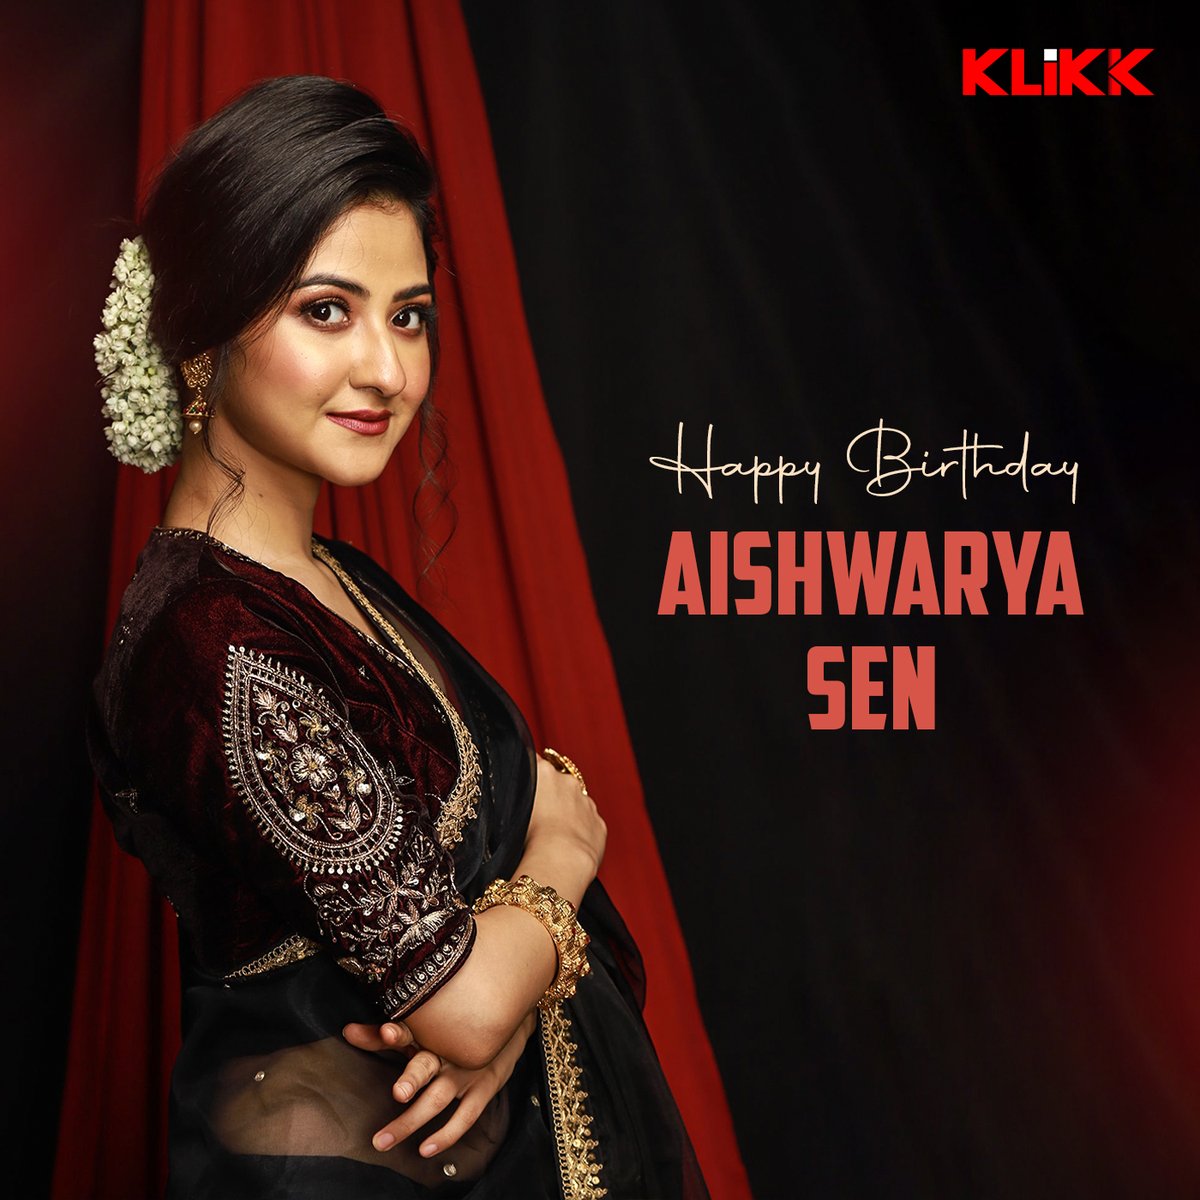 Happy birthday to the incredibly talented and captivating Aishwarya Sen! May this year bring even more remarkable achievements your way! 
#Klikk #aishwaryasen